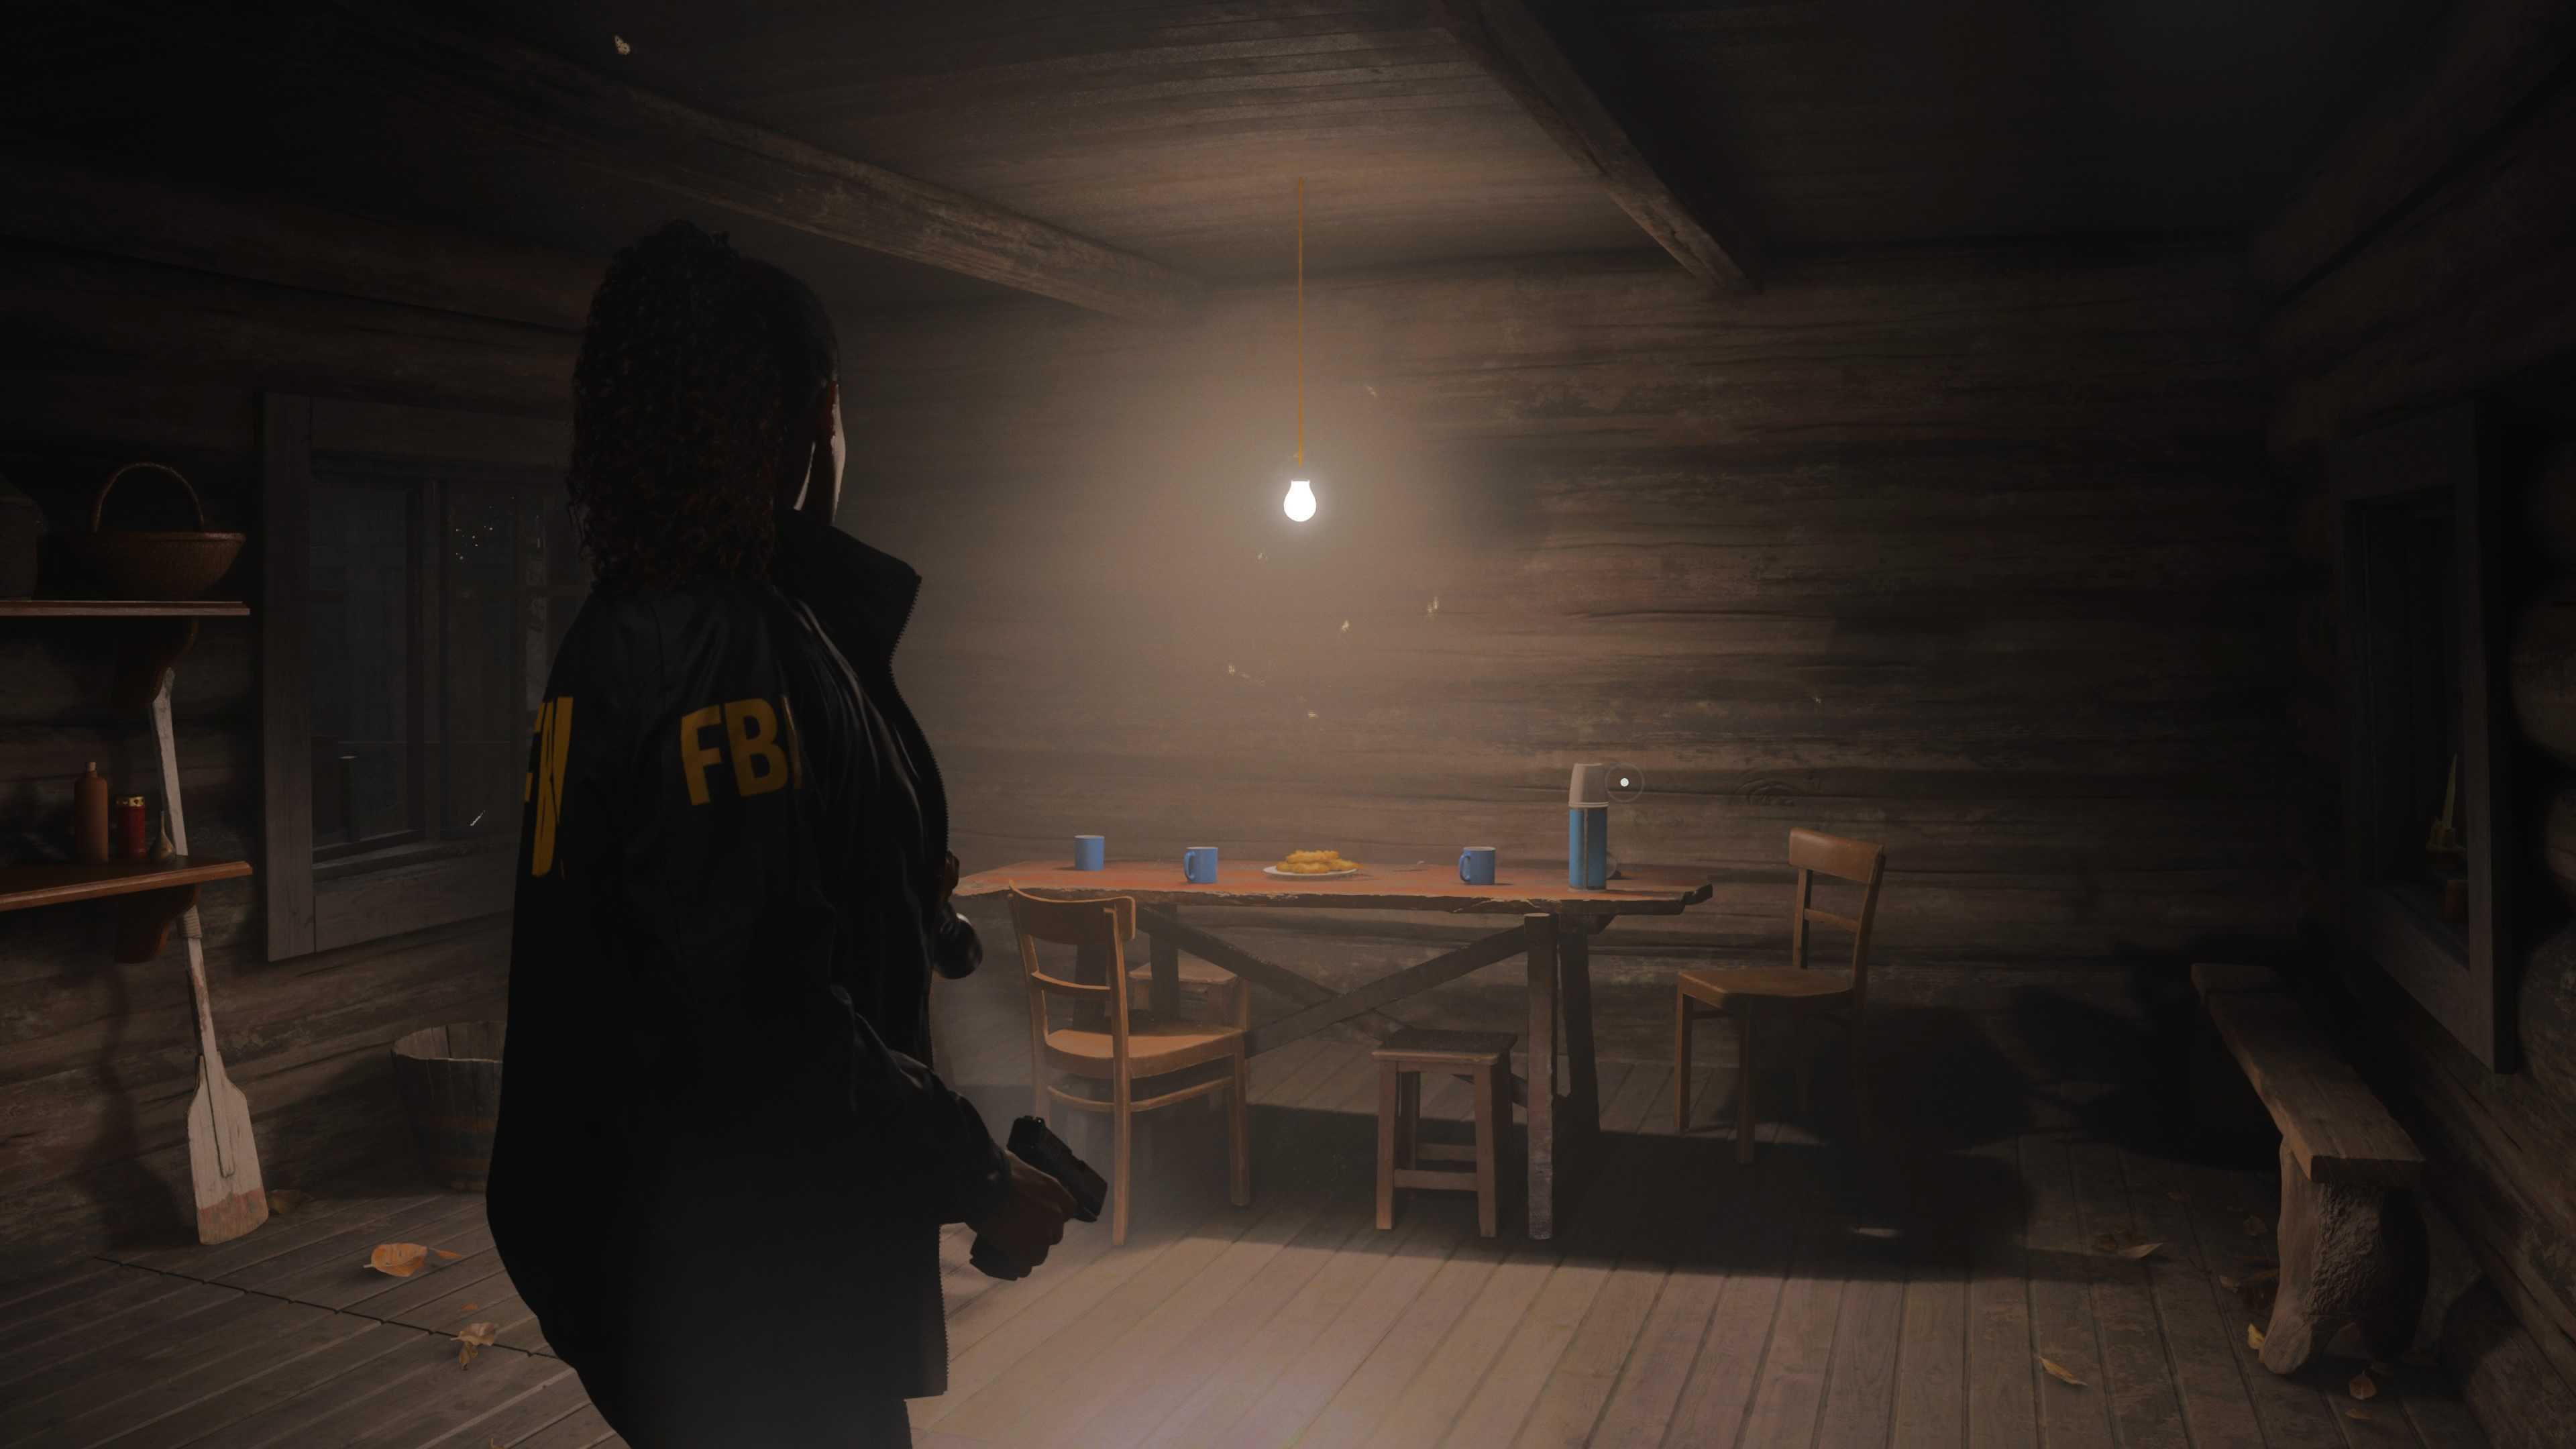 Alan Wake 2 review: HBO detective thriller meets bad LSD trip - Dot Esports